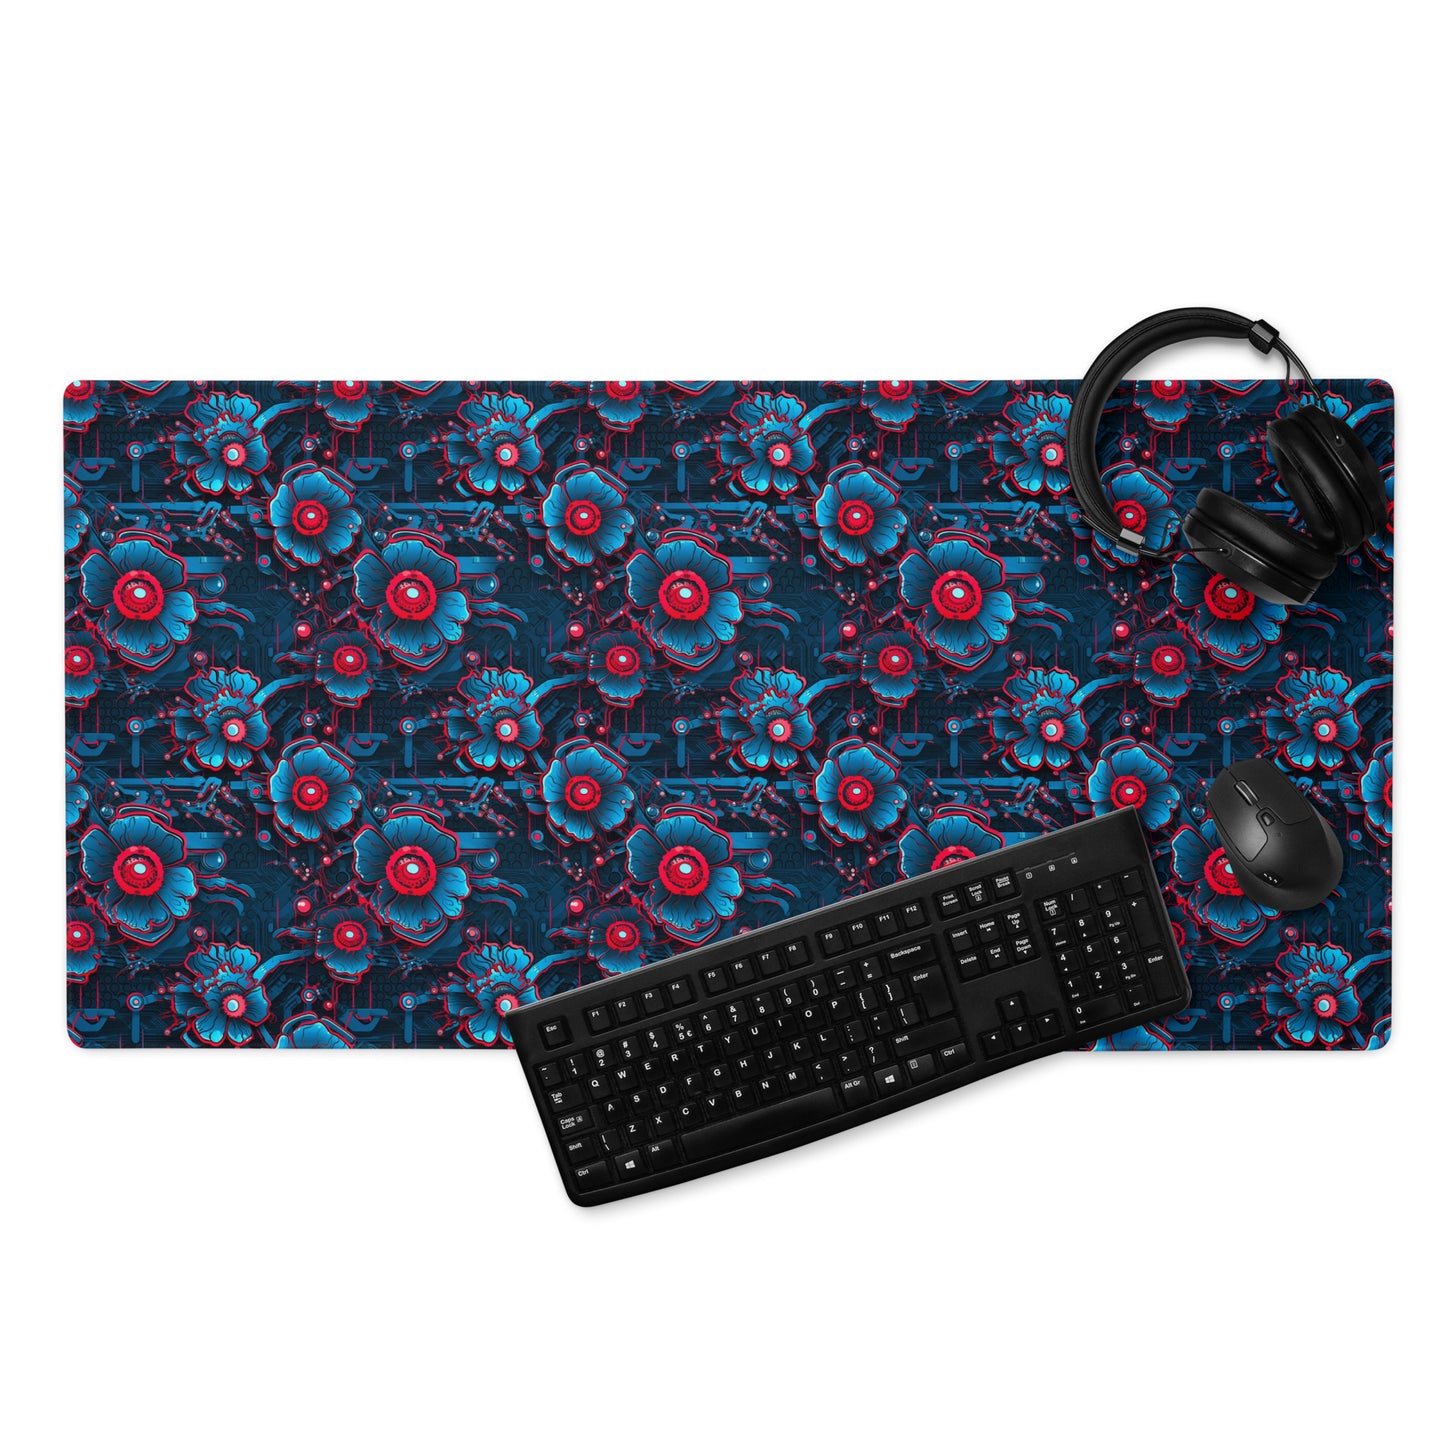 A 36" x 18" desk pad with a blue and red robotic floral pattern. With a keyboard, mouse, and headphones sitting on it.